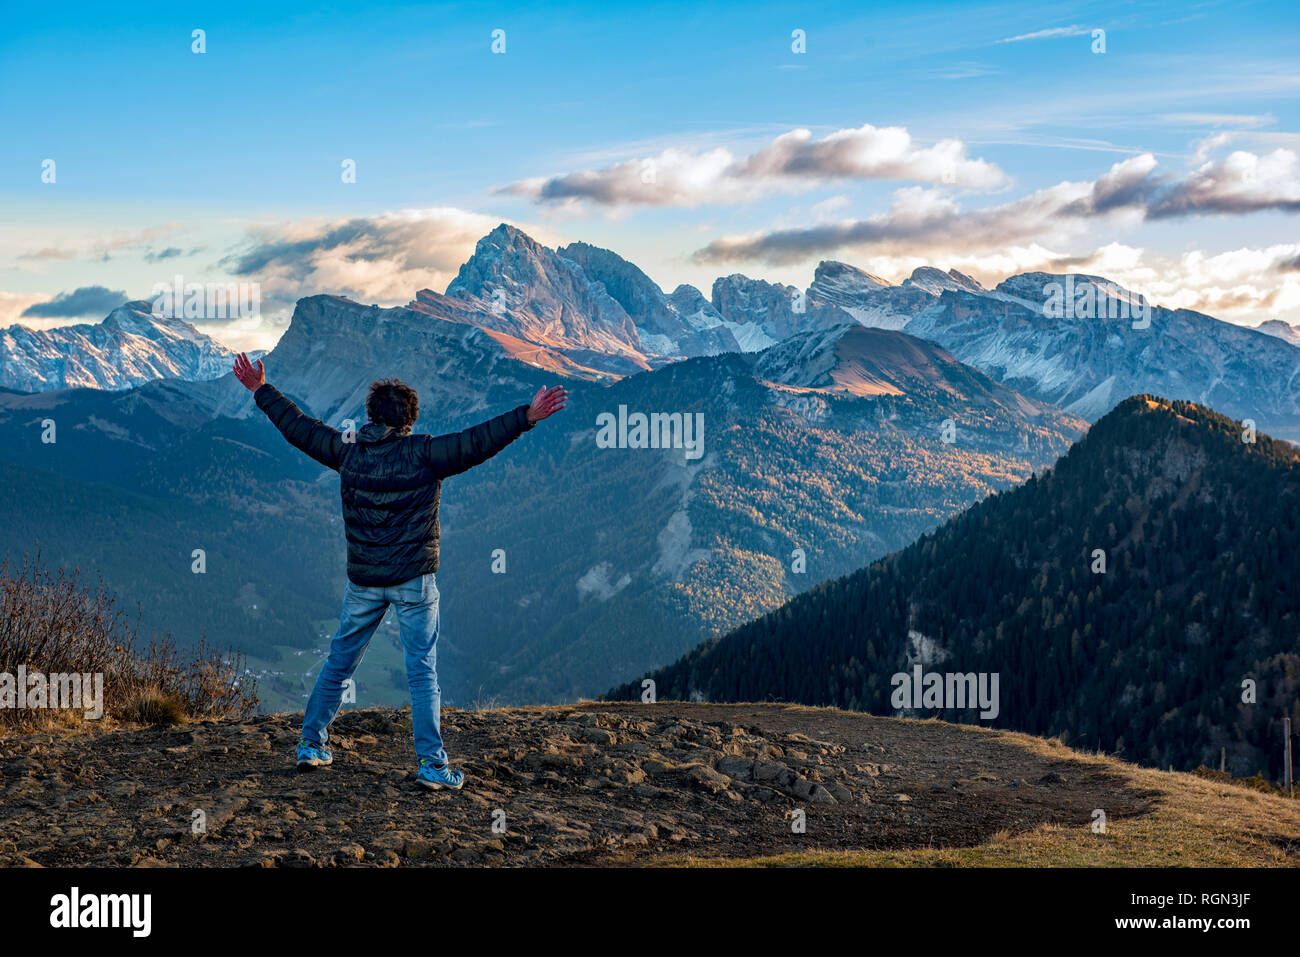 Italy, Trentino,Alpe di SIusi, , Hiker in front of Seceda and Sass Rigais at sunrise Stock Photo